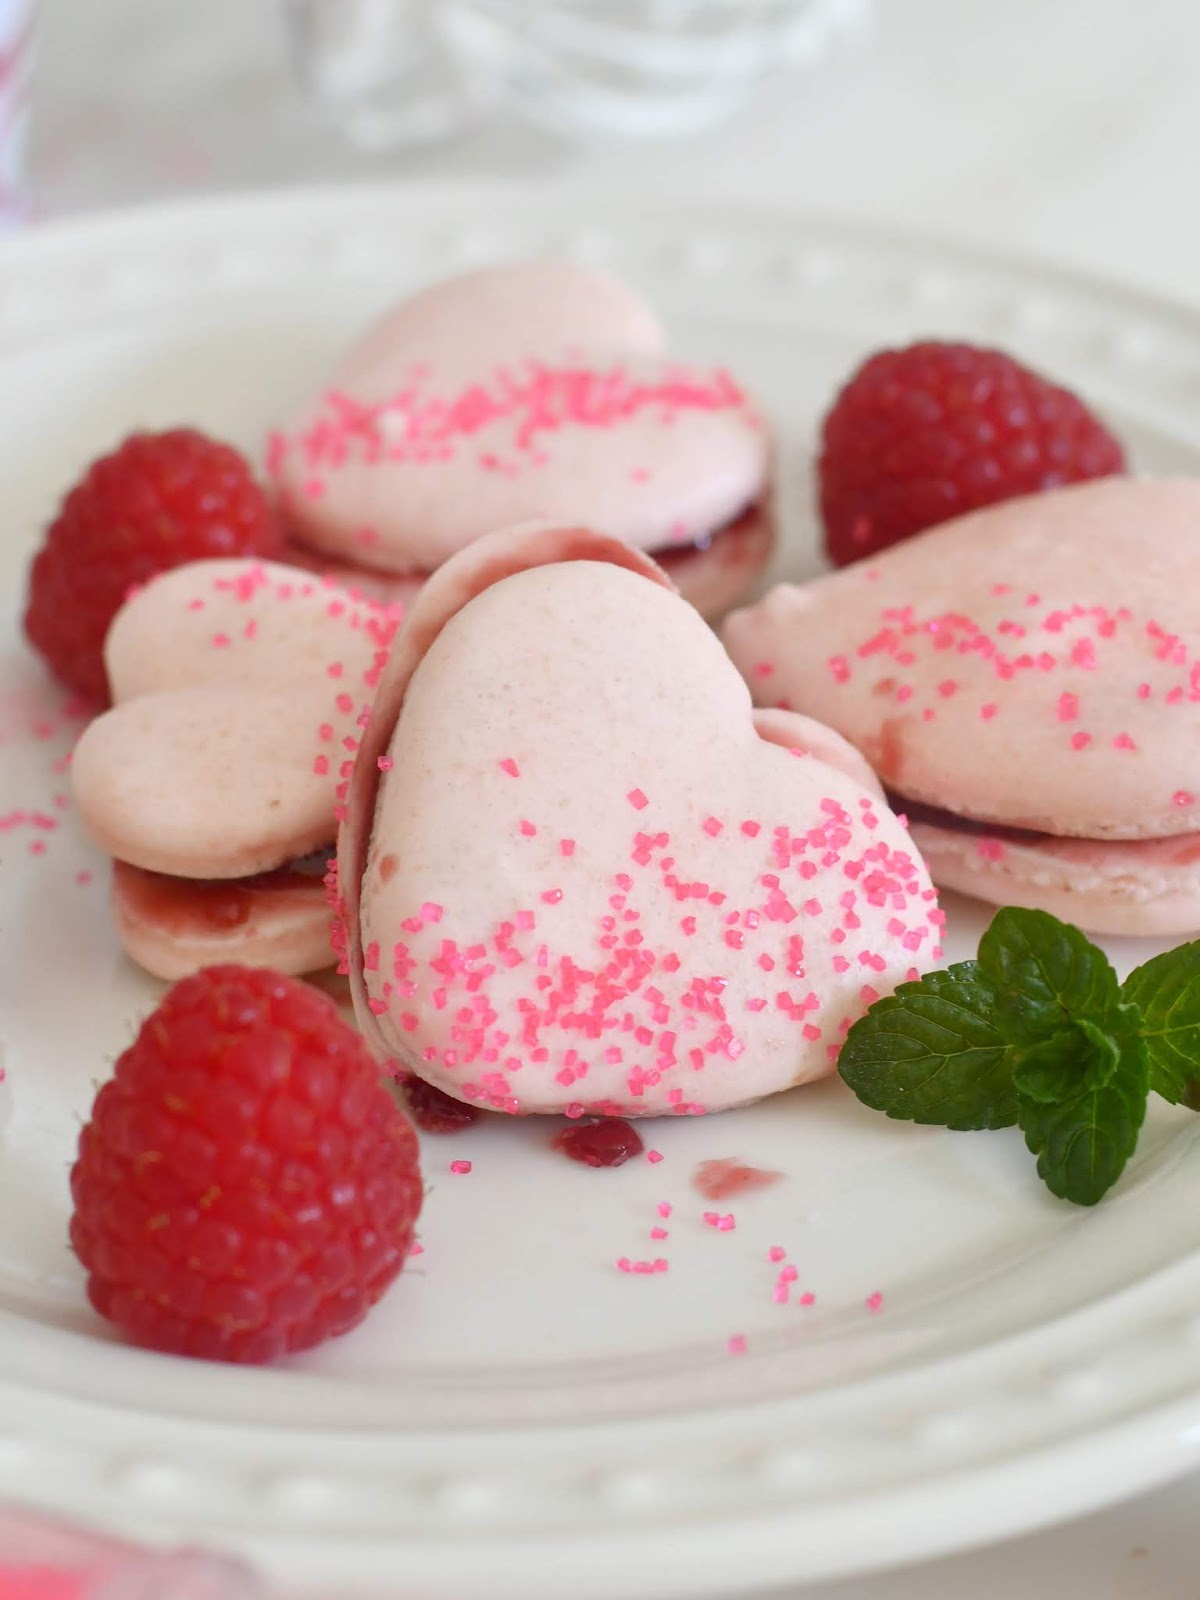 Cooking with Manuela: Heart-Shaped Raspberry French Macarons